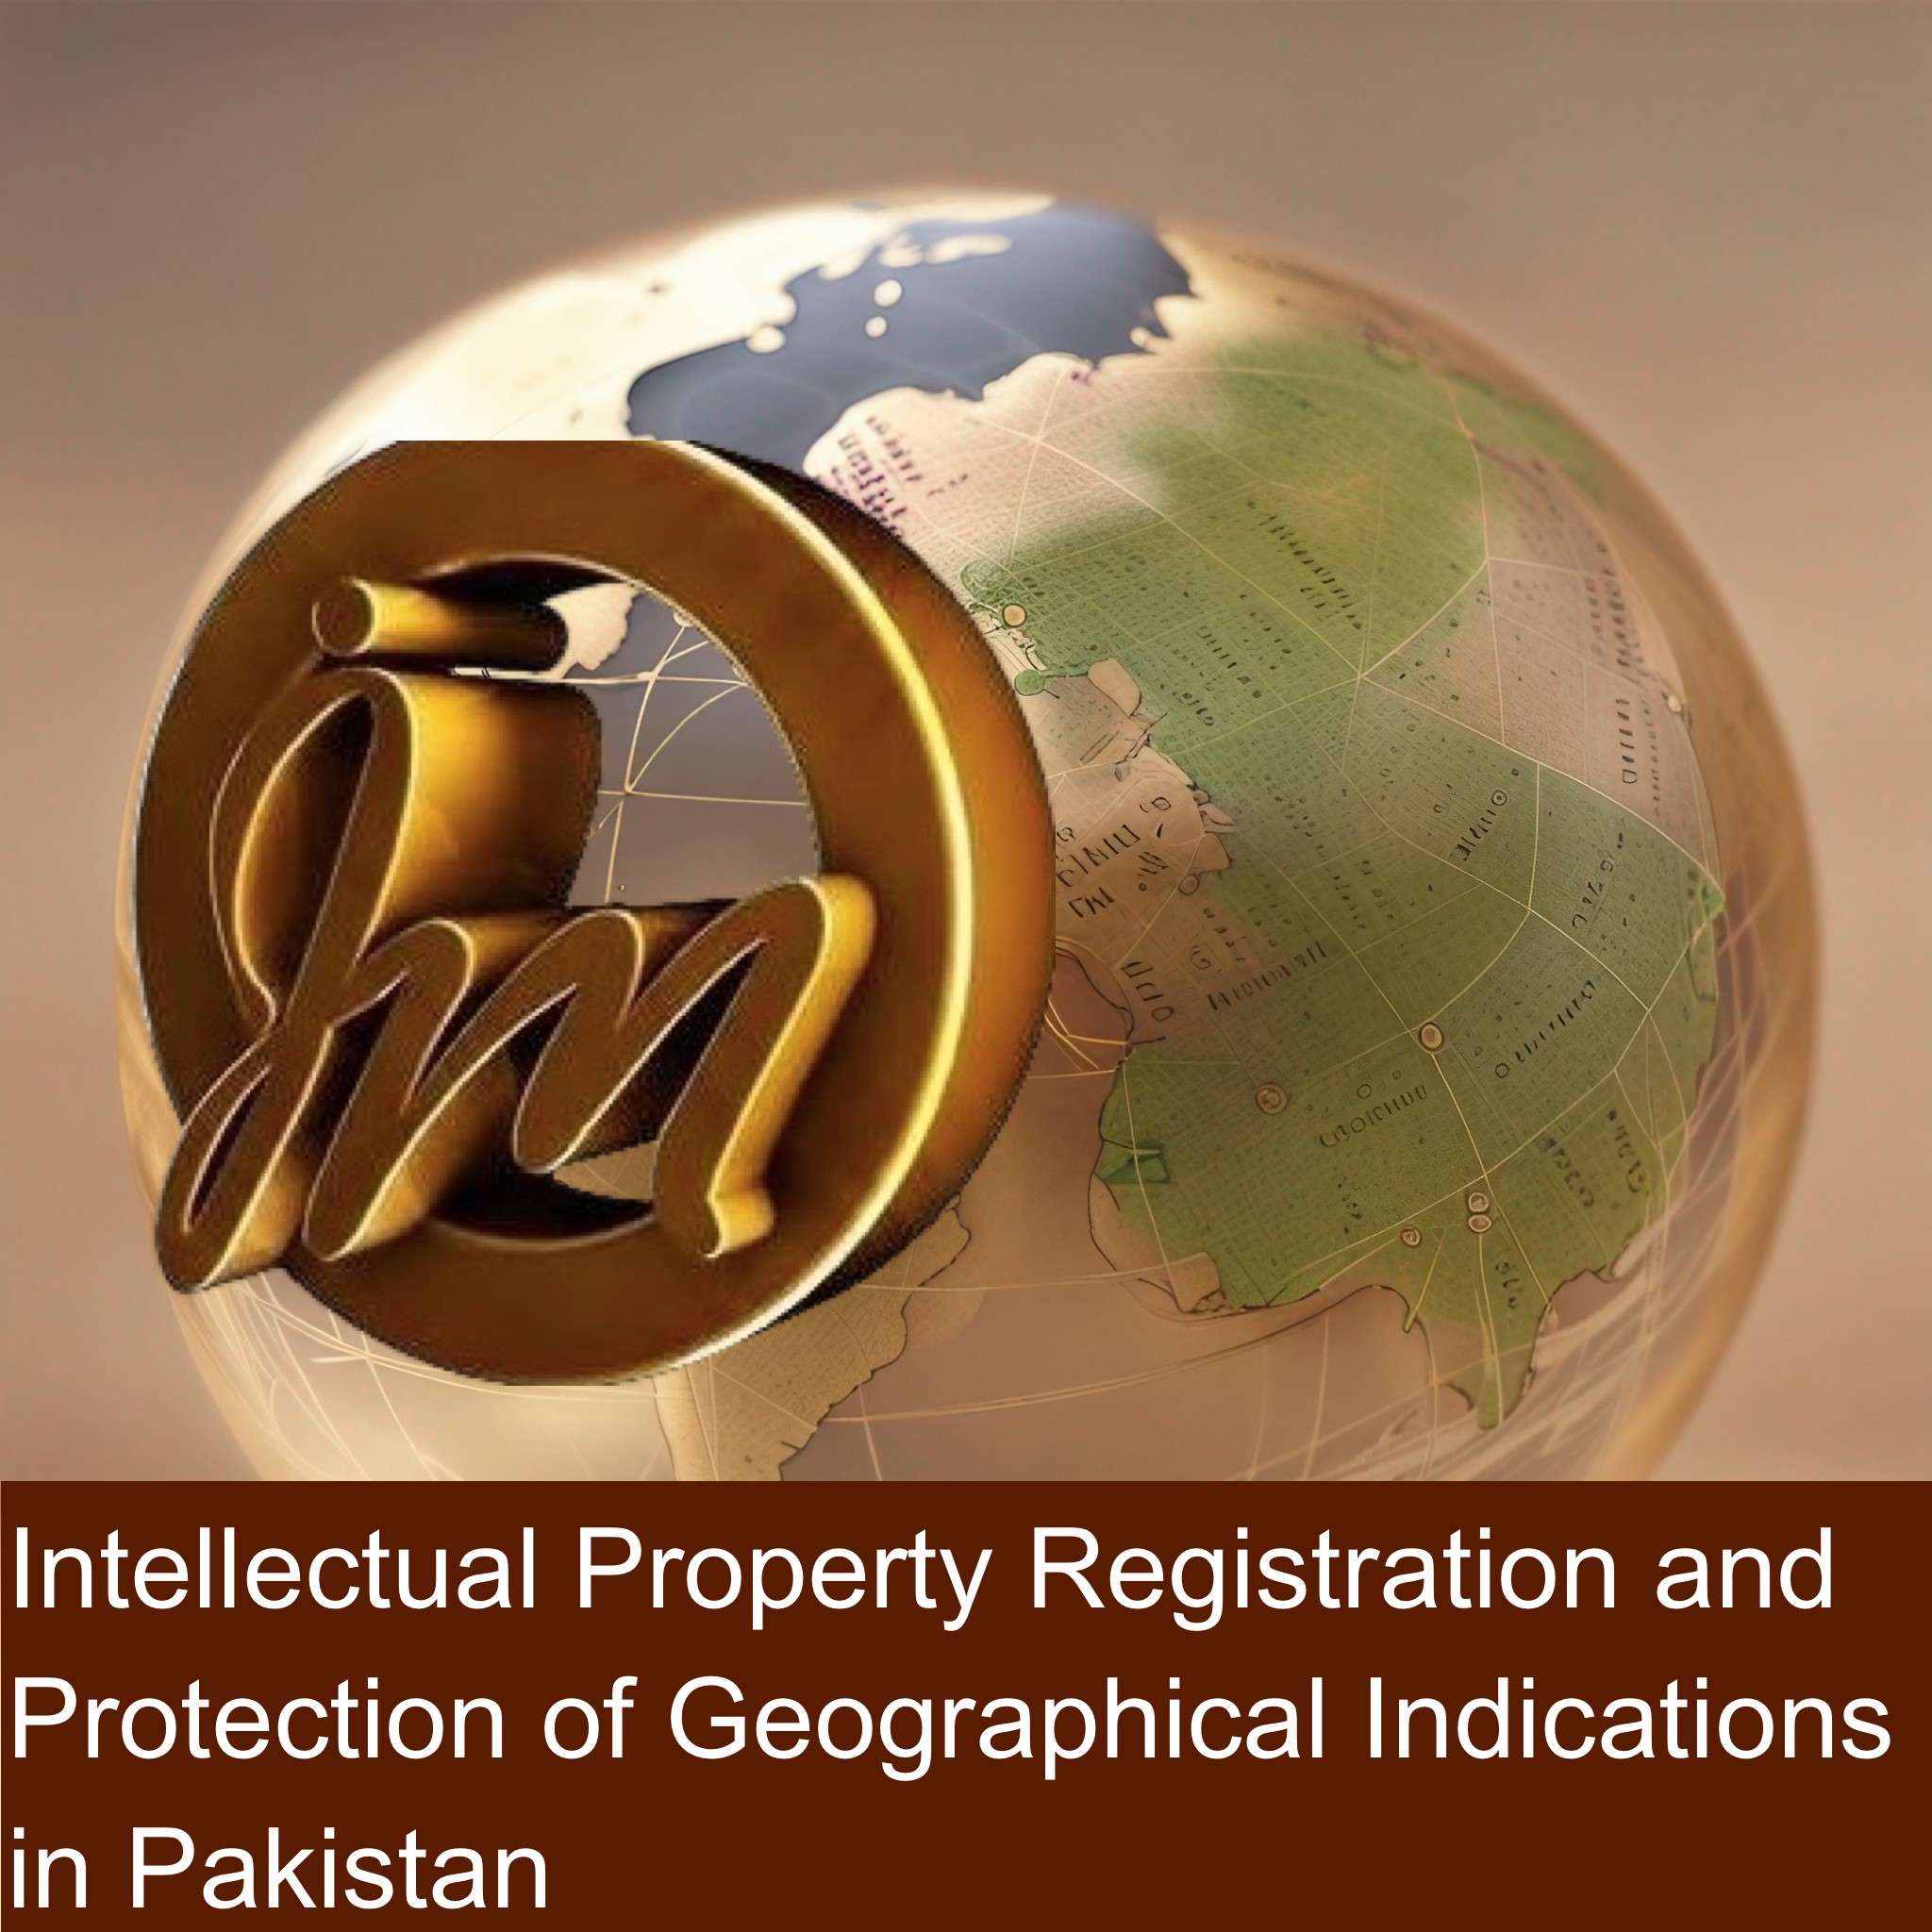 Intellectual Property Registration and Protection of Geographical Indications in Pakistan